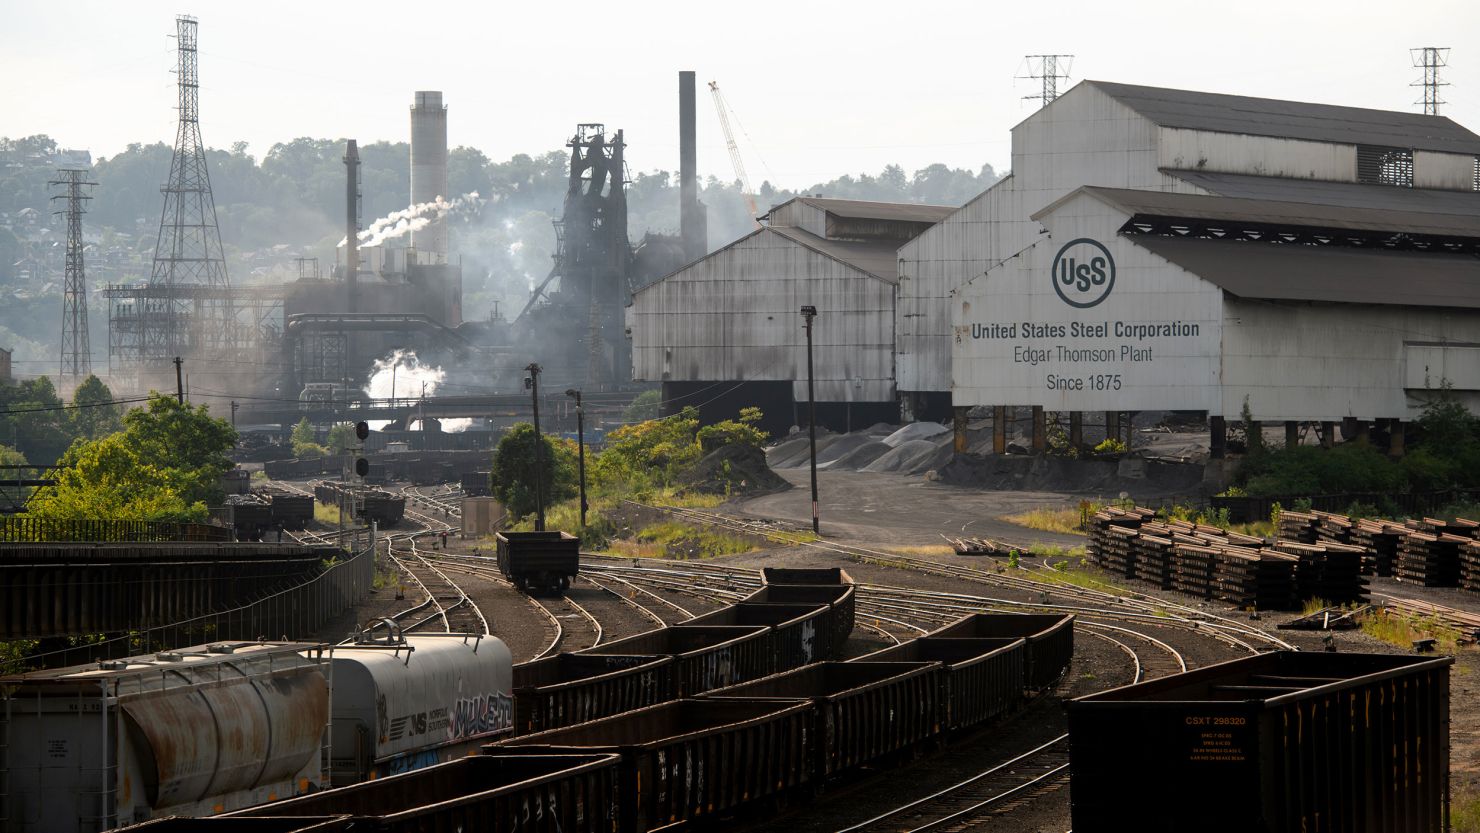 US Steel's Edgar Thomson Plant in Braddock, Pennsylvania outside of Pittsburgh. The 122-year-old company, once the backbone of a US economy powered by manufacturing, has agreed to be purchased by Nippon Steel, Japan's largest steelmaker, for $14.1 billion. The deal faces opposition from politicians and the United Steeelworkers union though.